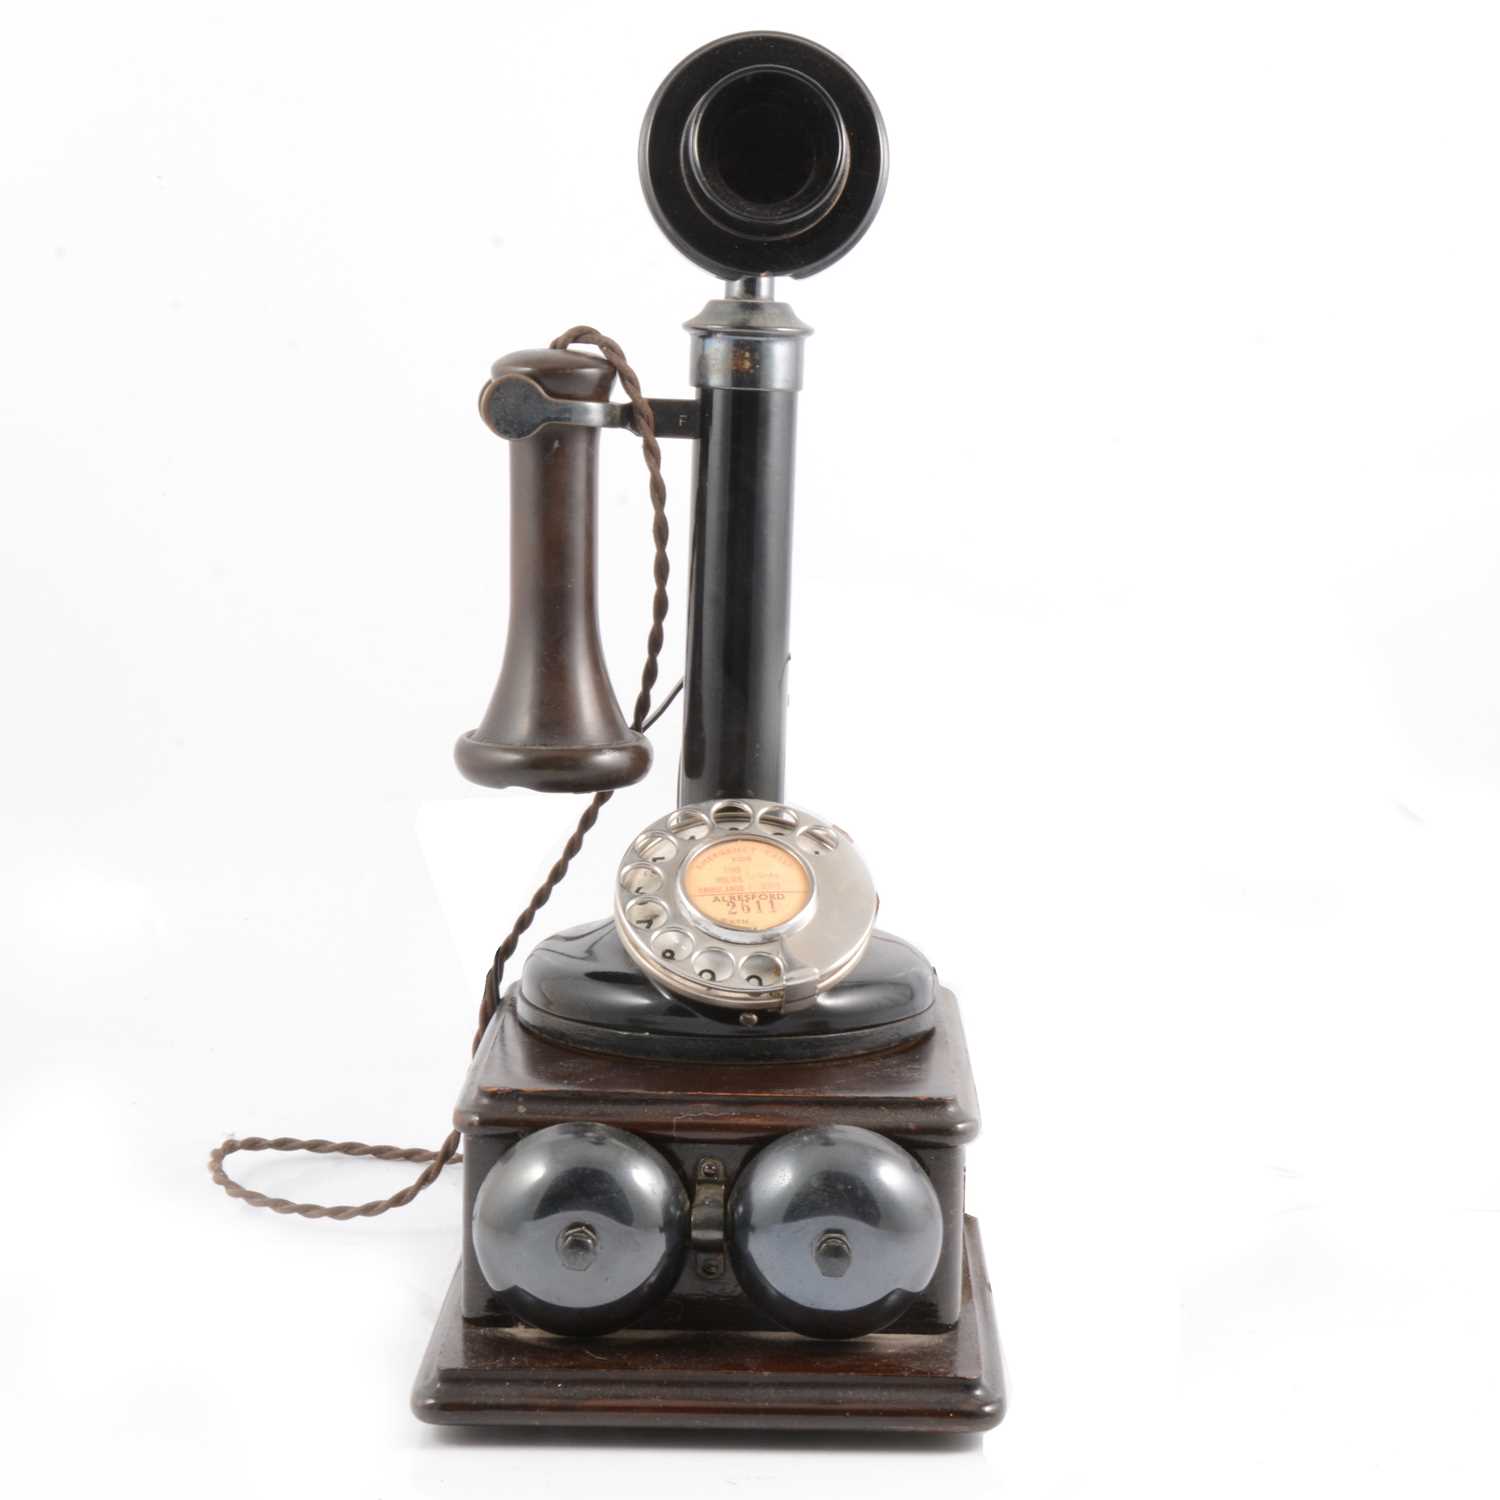 Lot 113 - Vintage candlestick telephone, GPO 150, with bell box.